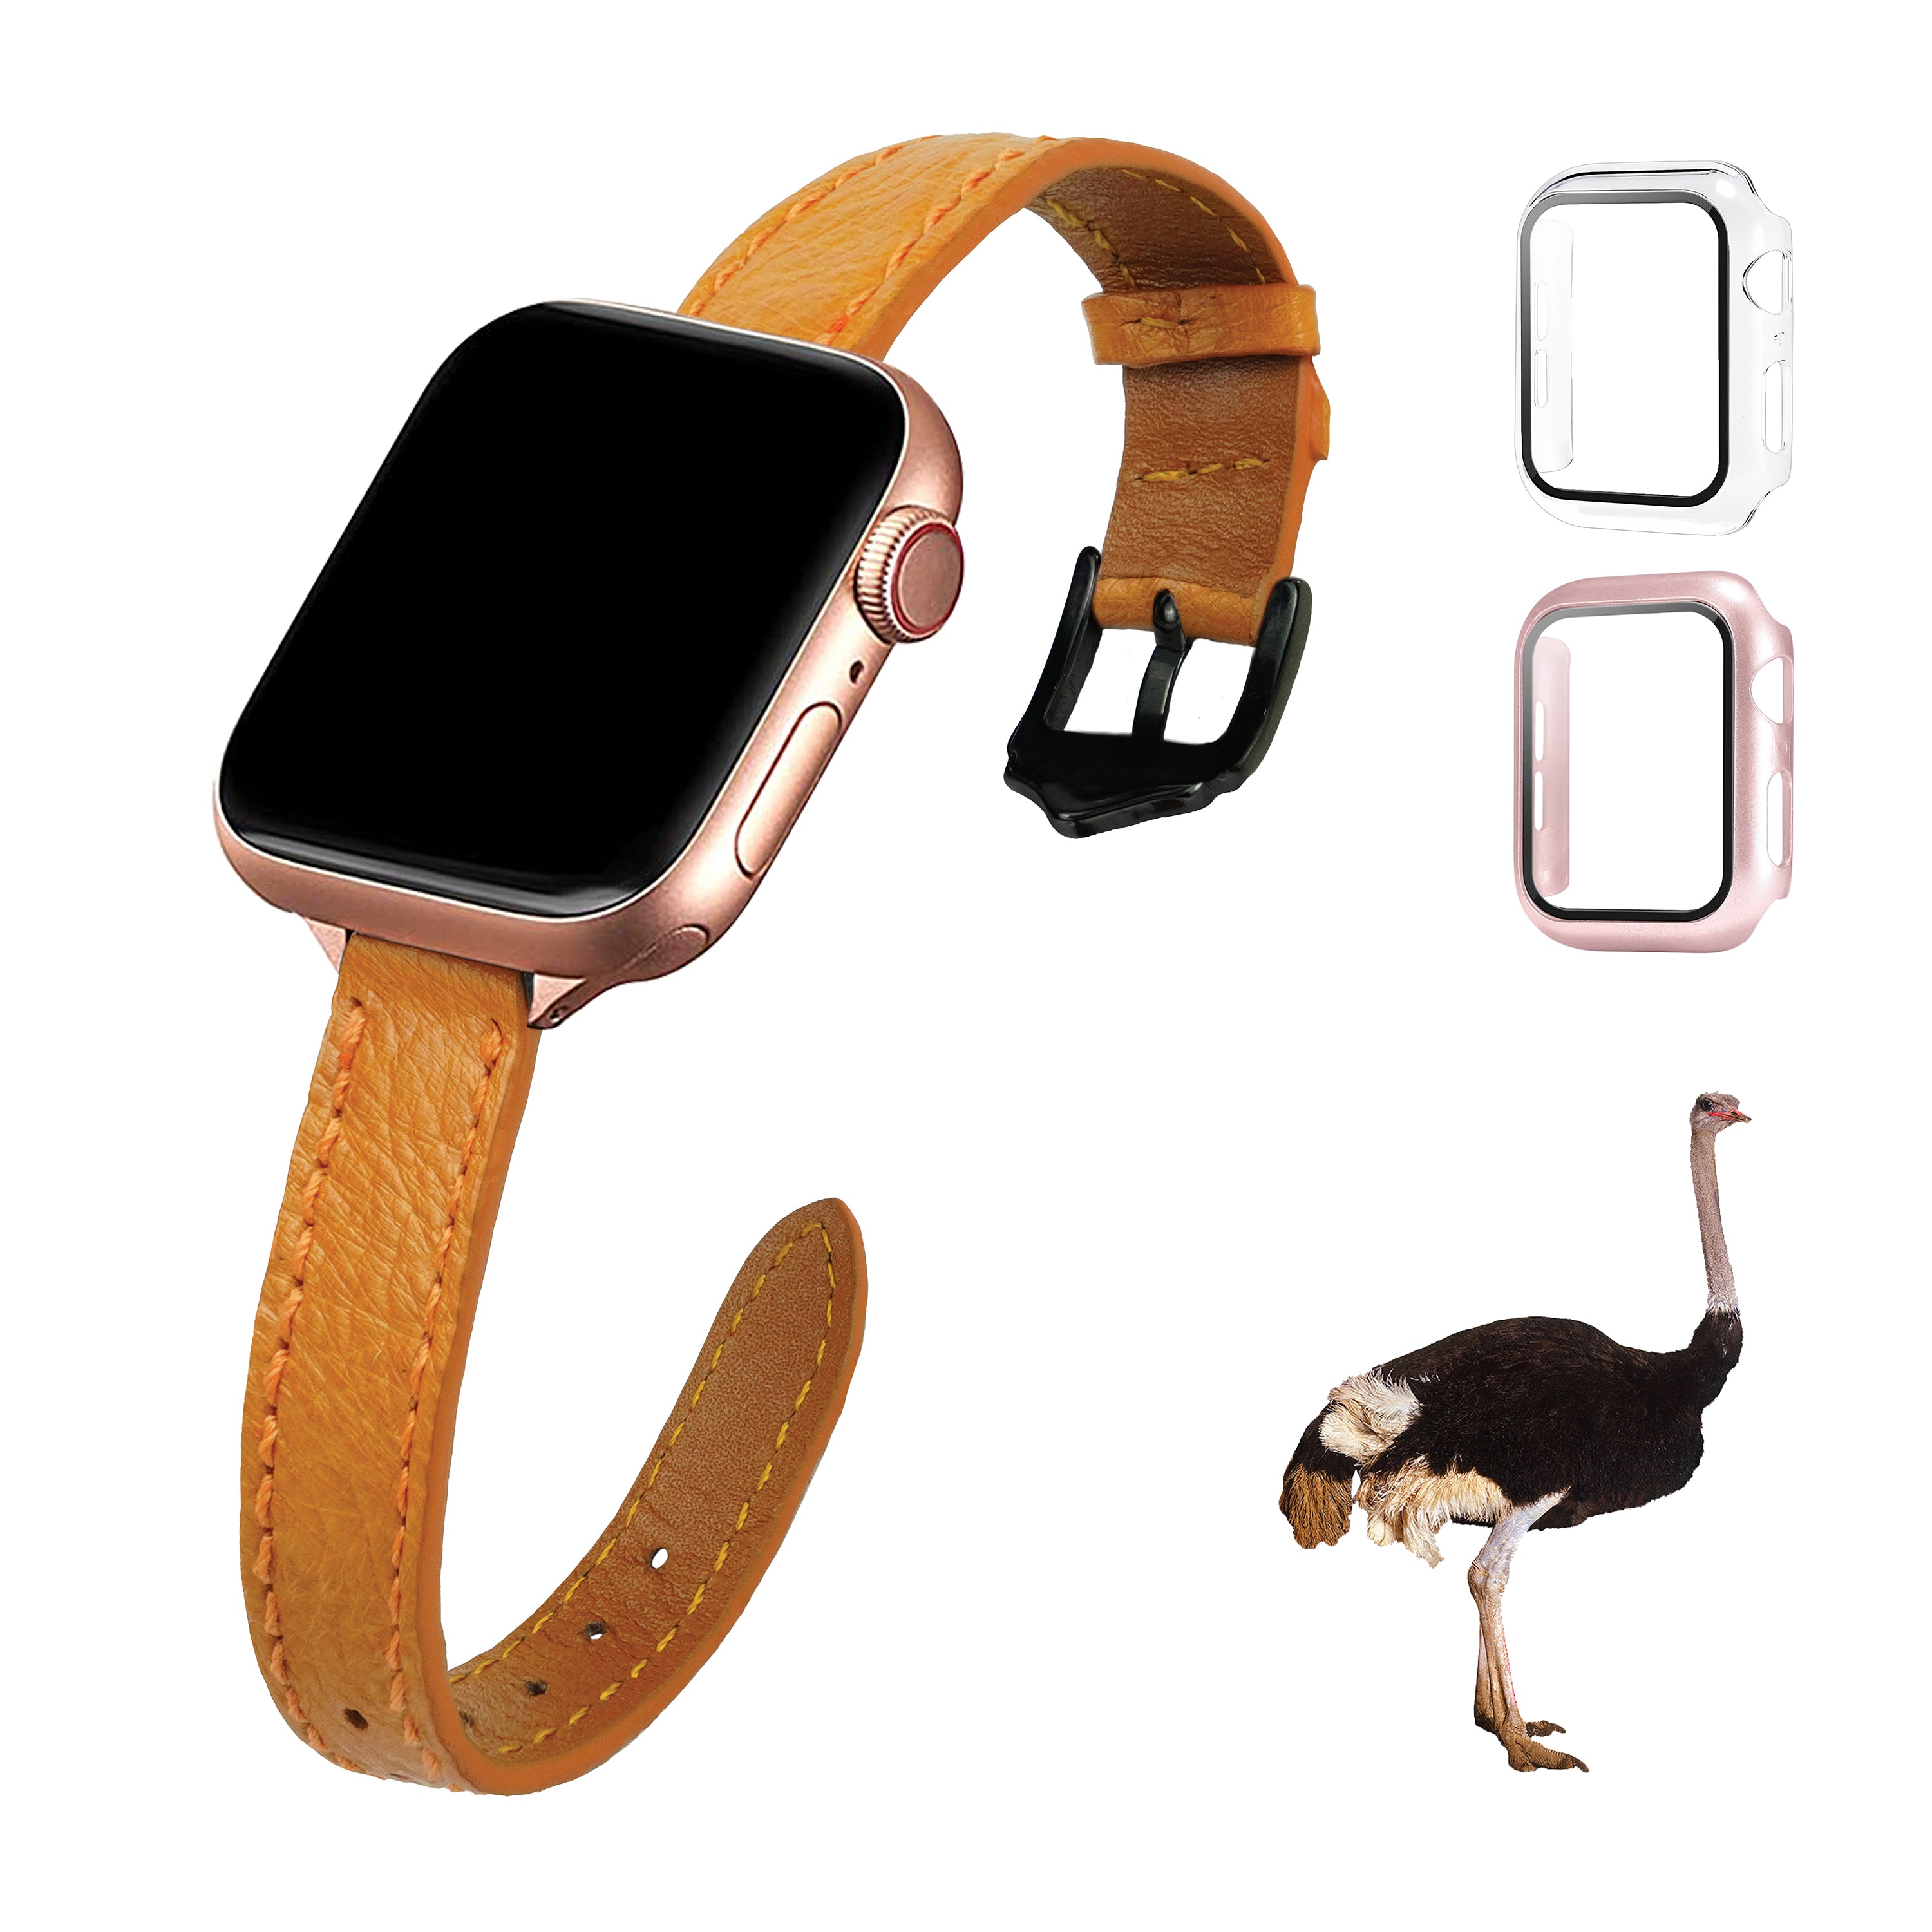 Tan Flat Ostrich Leather Band Compatible Apple Watch Iwatch 40mm Screen Protector Case Black Adapter Replacement Strap For Smartwatch Series 4 5 6 SE Leather Handmade AW-182B-W-40MM